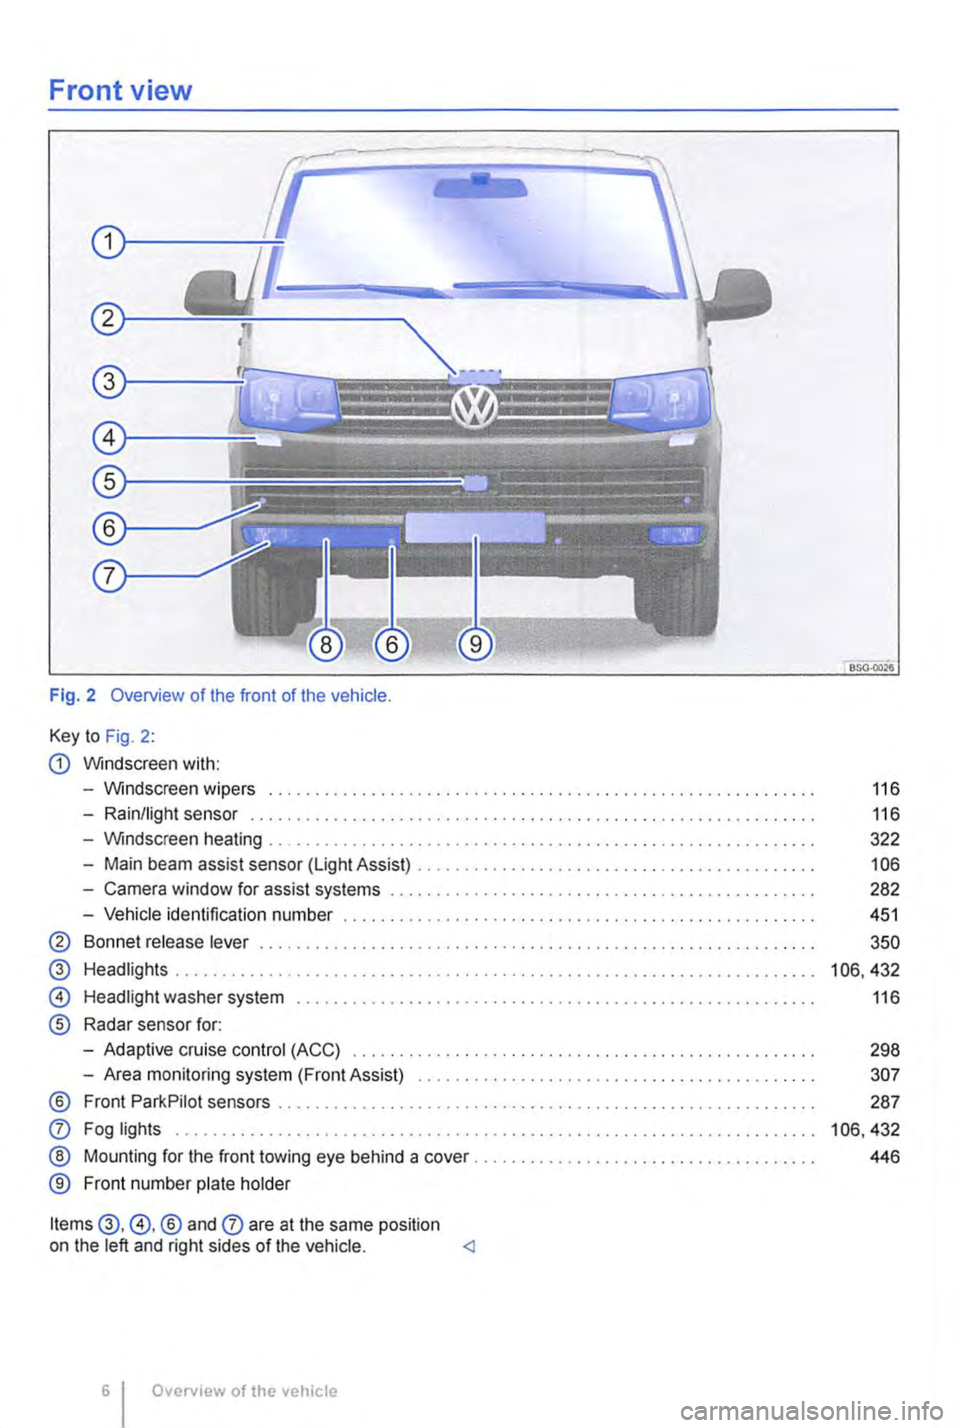 VOLKSWAGEN TRANSPORTER 2021  Owners Manual Front view 
Fig. 2 Overview of the front of the vehicle. 
Key to Fig. 2: 
G) Windscreen with: 
-Windscreen wipers .............. . 
-Rain/light sensor .............. . 
-Windscreen heating 
-Main beam